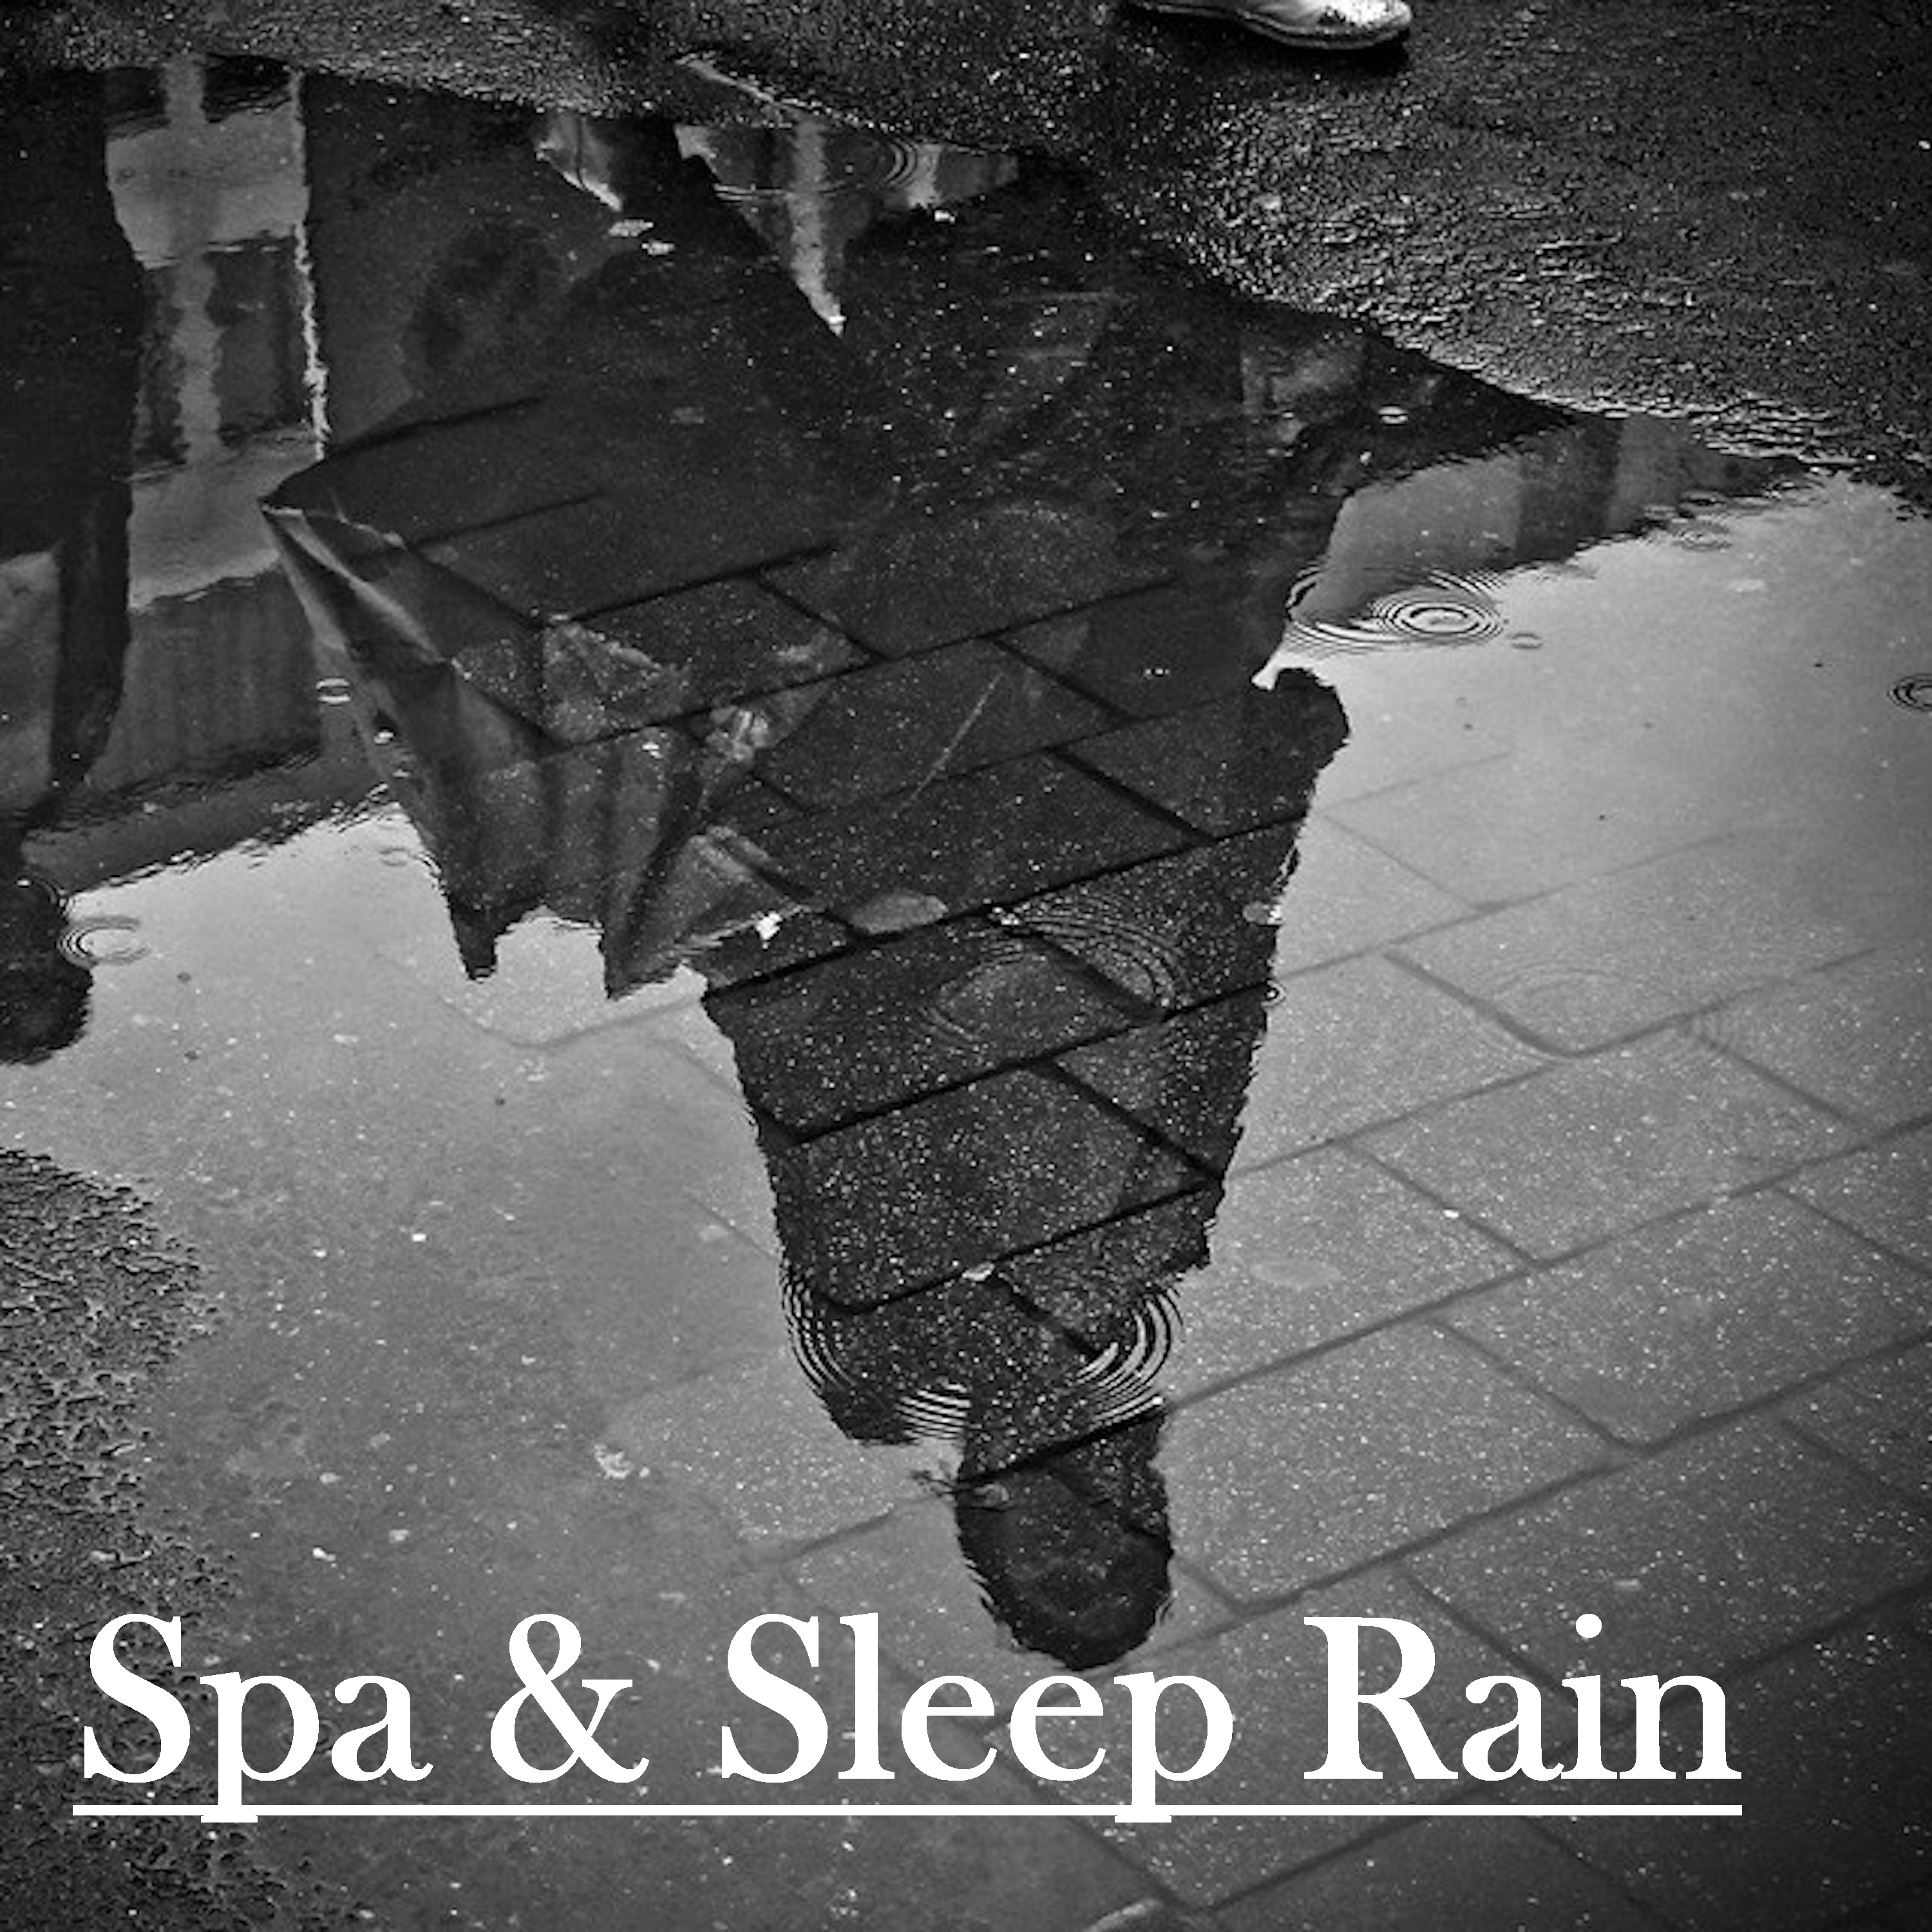 17 Spa and Sleep Rain Sounds - Peaceful and Relaxing